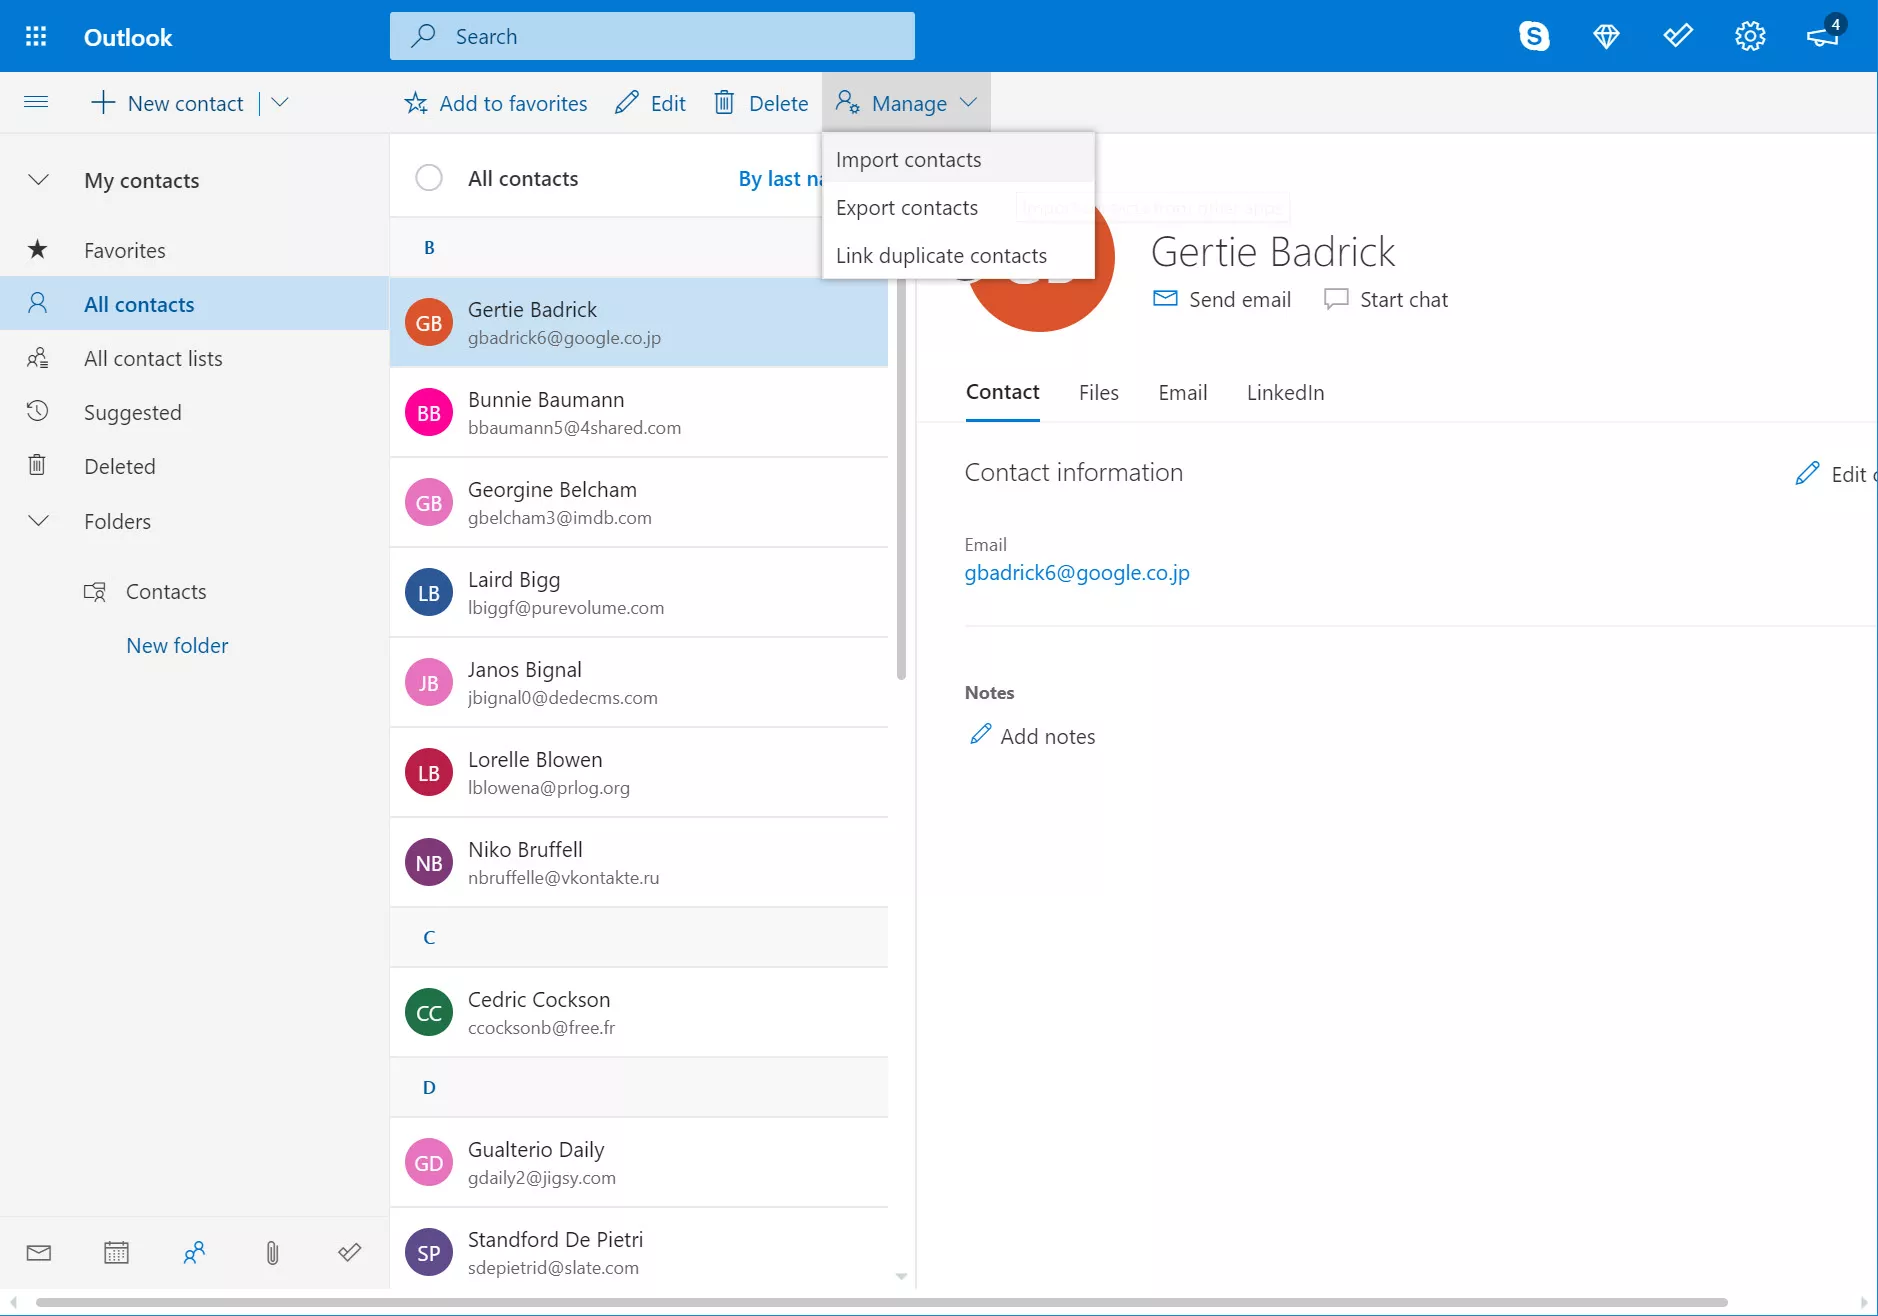 Manage menu and Import contacts selection in Outlook.com